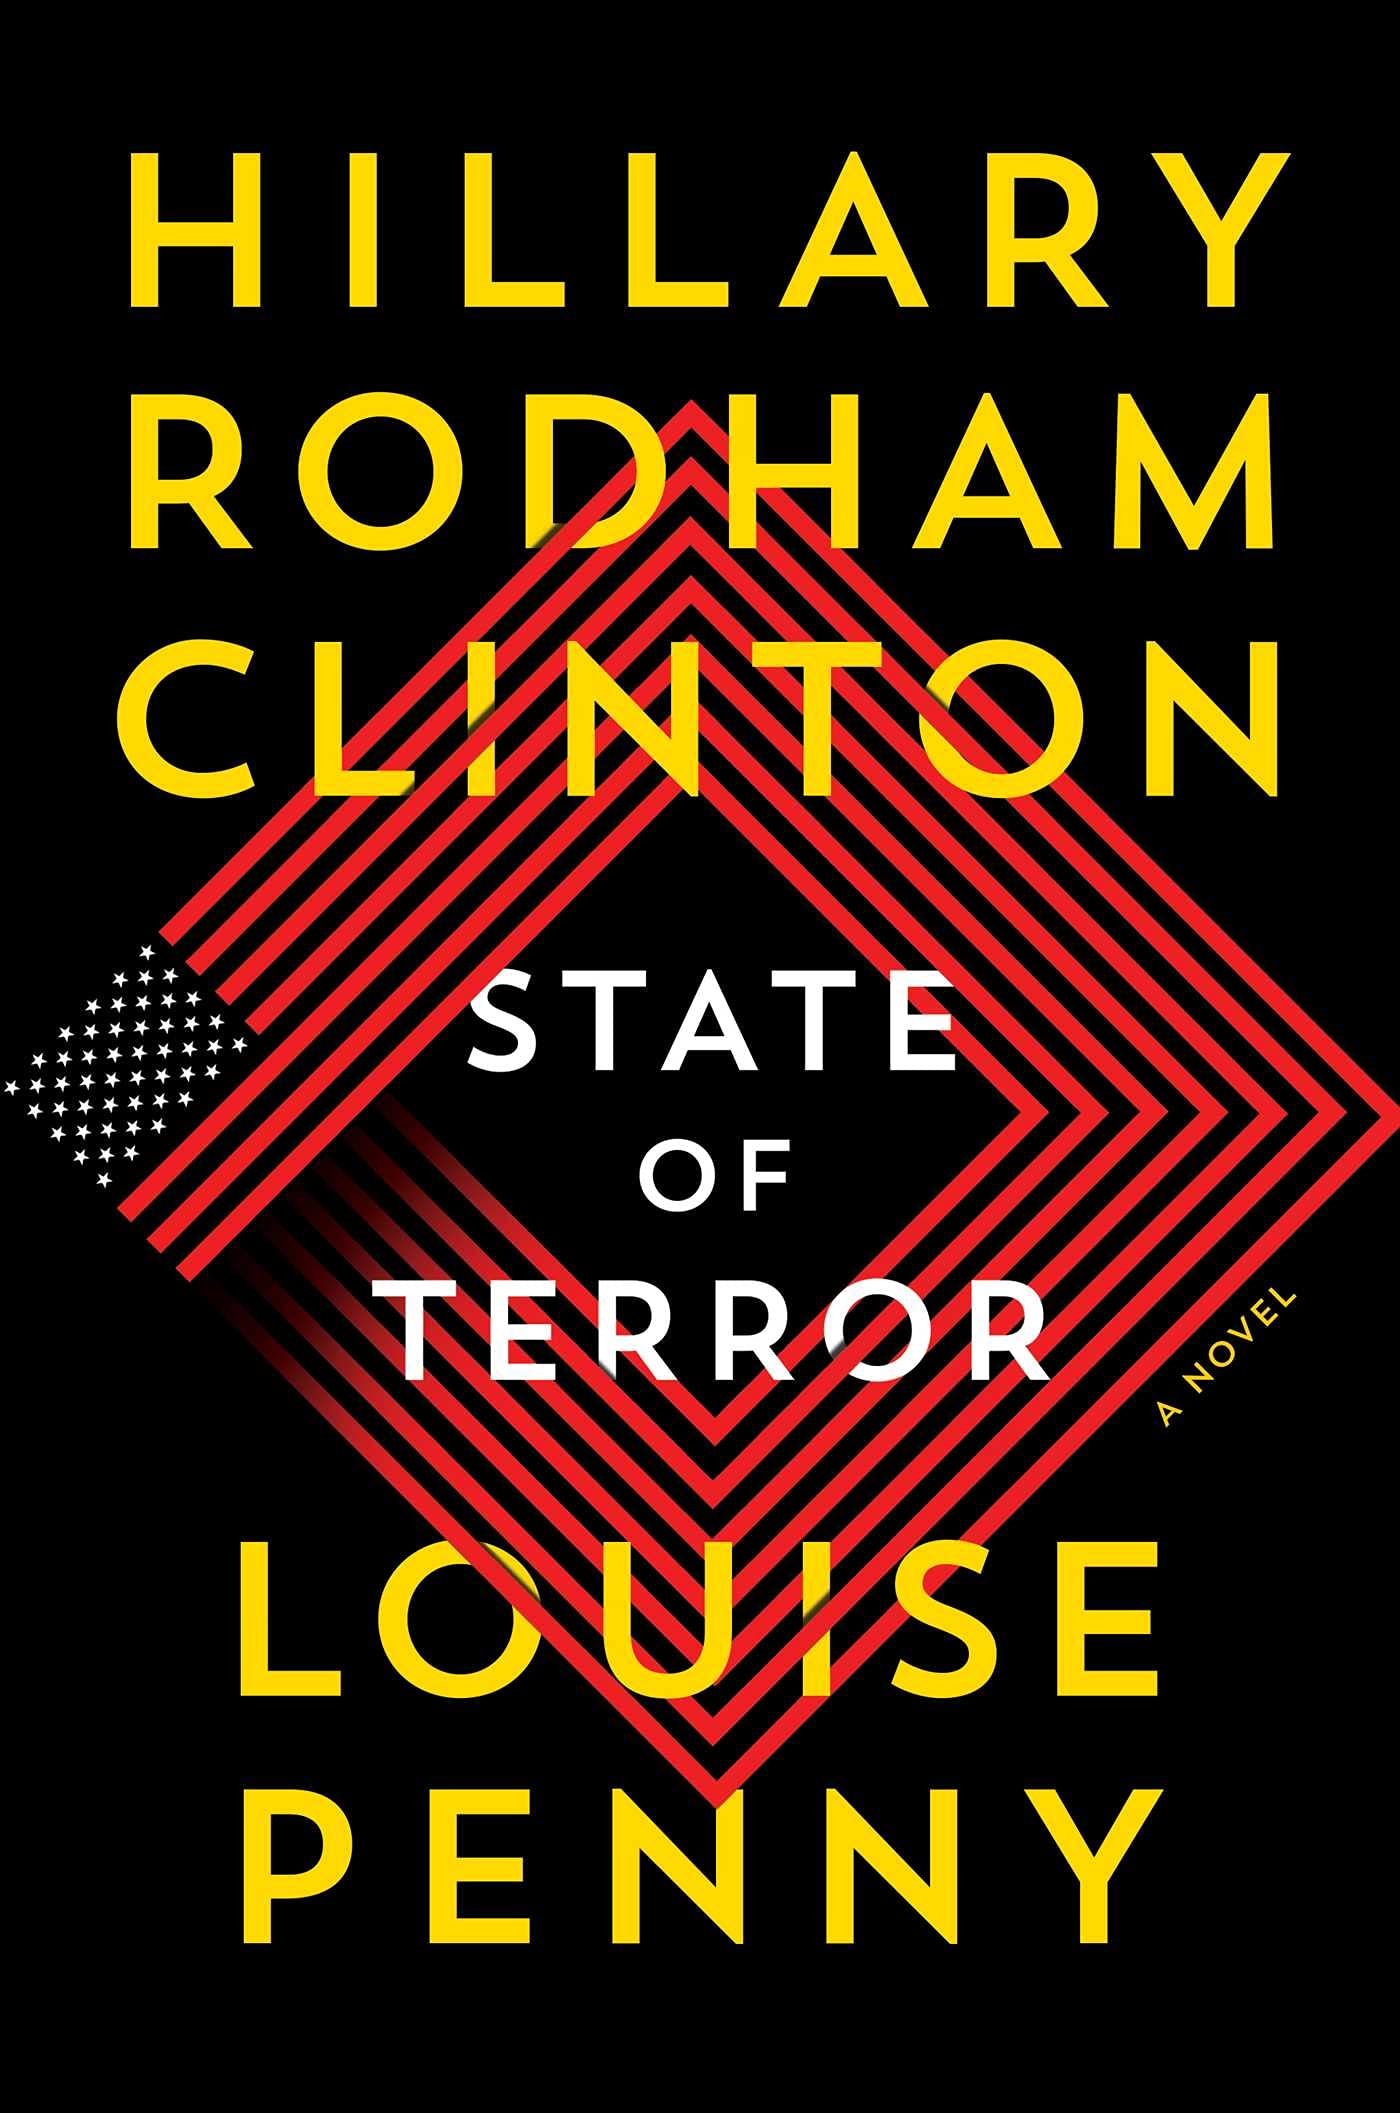 State of Terror by Hillary Rodham Clinton & Louise Penny